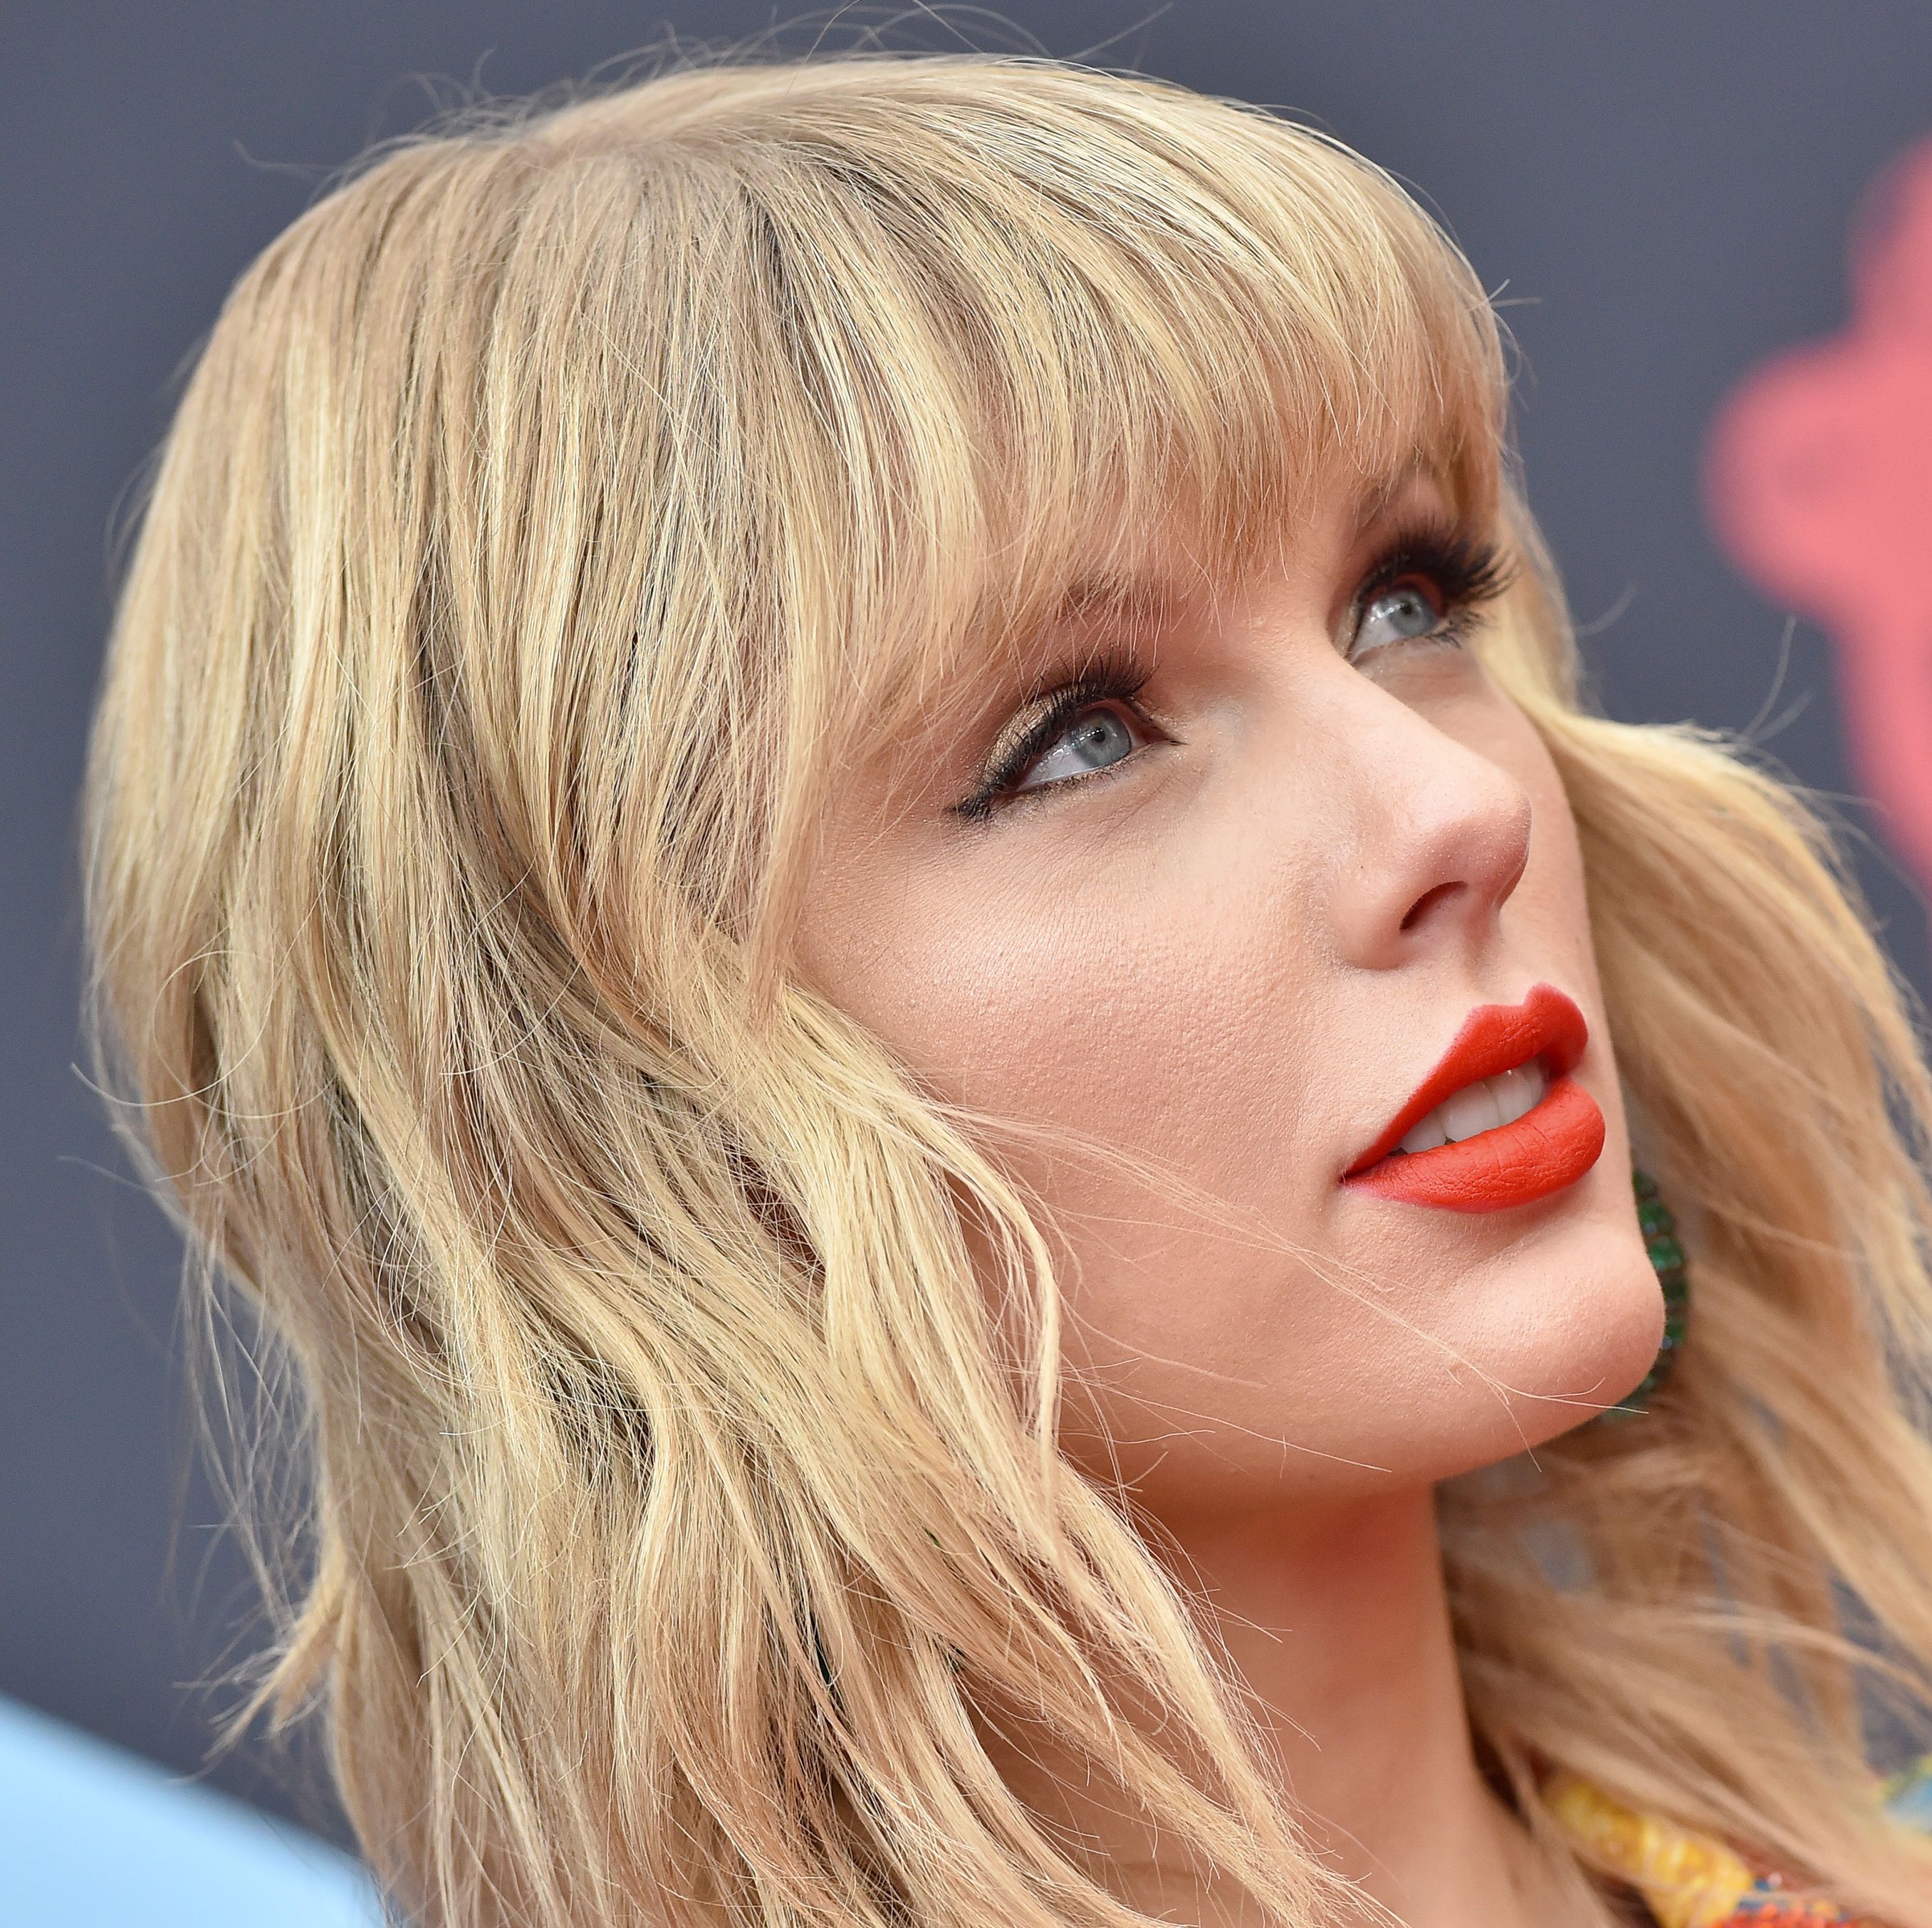 Taylor's New Version of 'Love Story' Features One Huge Difference